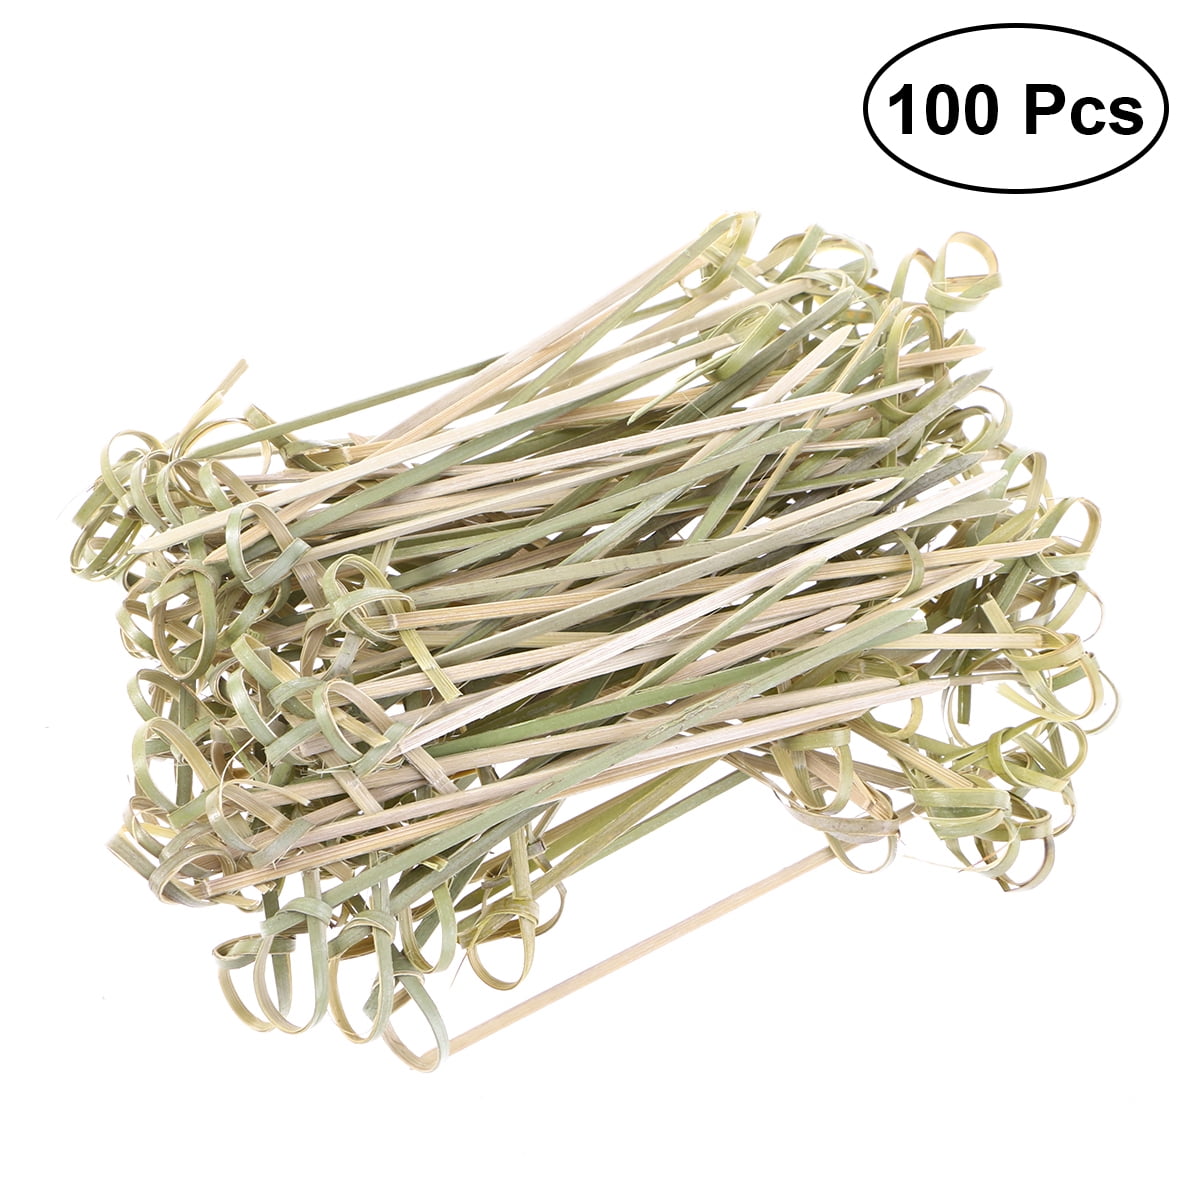 4 Inch Twisted Ends Bamboo Skewers Cocktail Picks 200 Bamboo Knot Skewers 